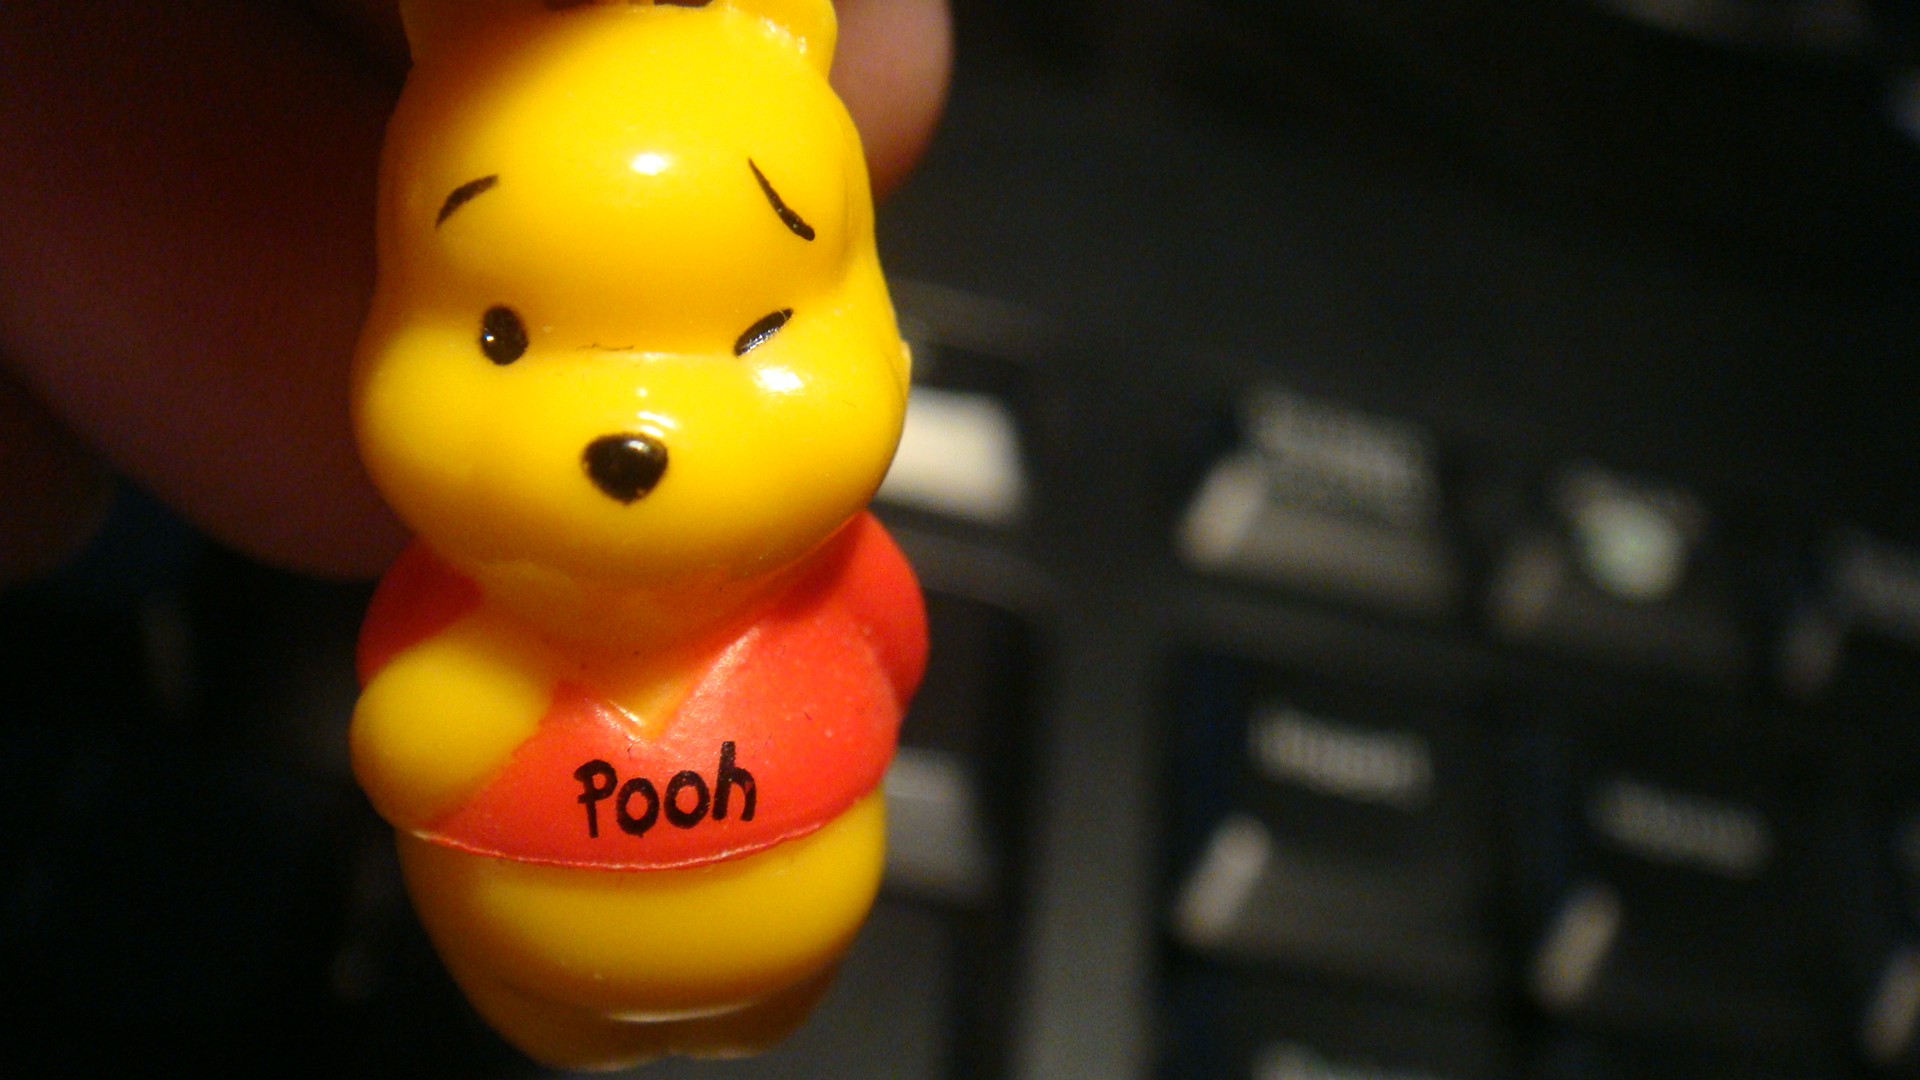 a yellow winnie the pooh key chain attached to a keyboard